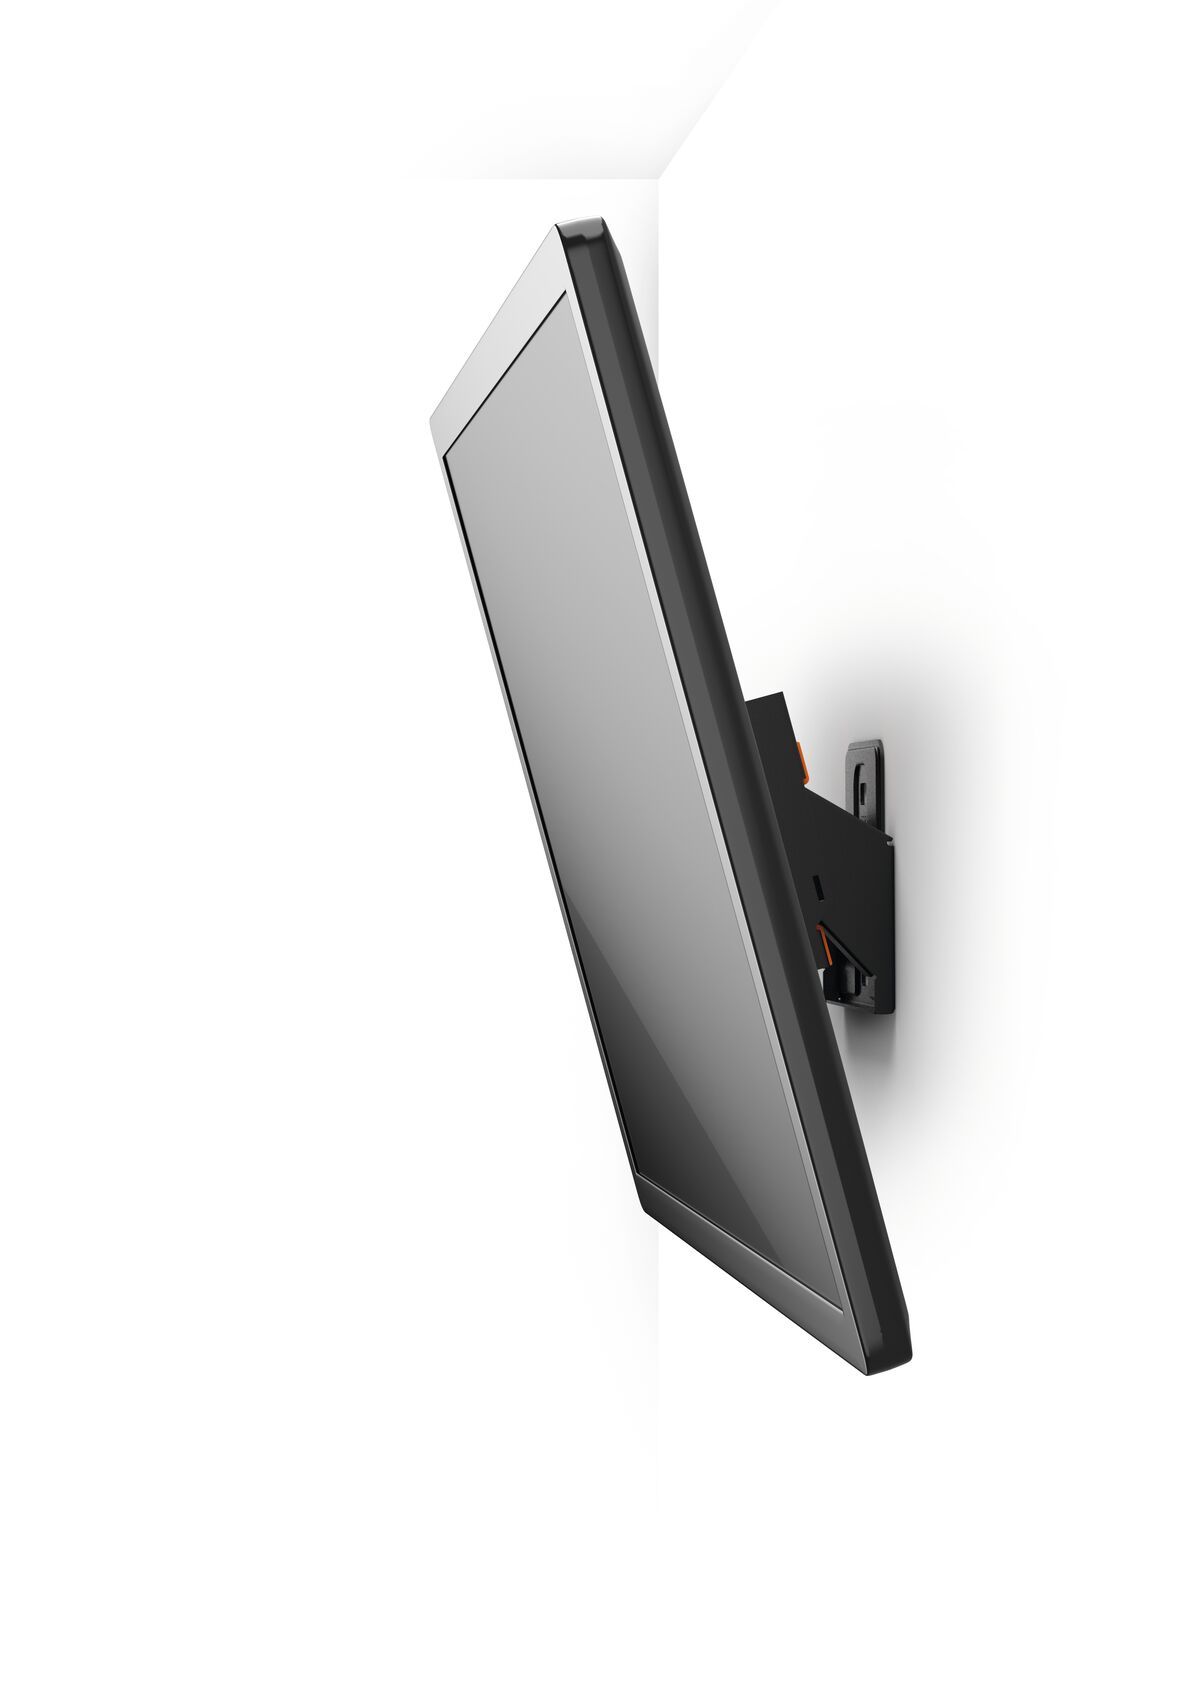 Vogel's W50610 Tilting TV Wall Mount - Suitable for 19 up to 43 inch TVs up to Tilt up to 15° - White wall